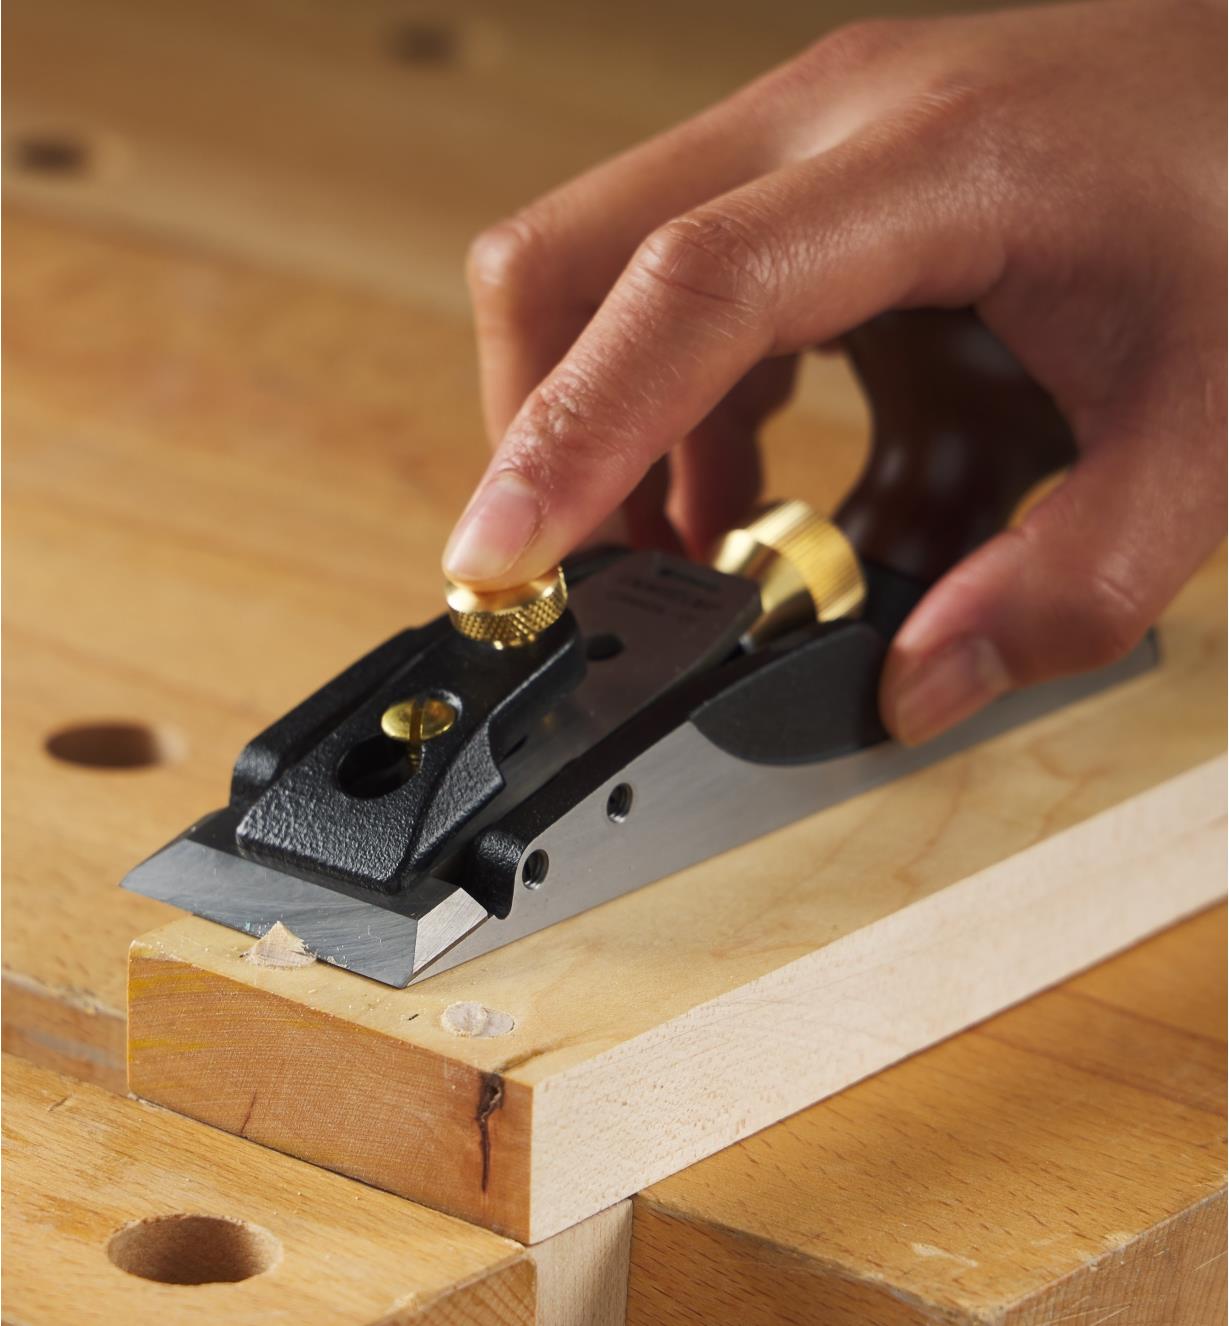 Trimming plugs on a board using the cabinetmaker’s trimming plane